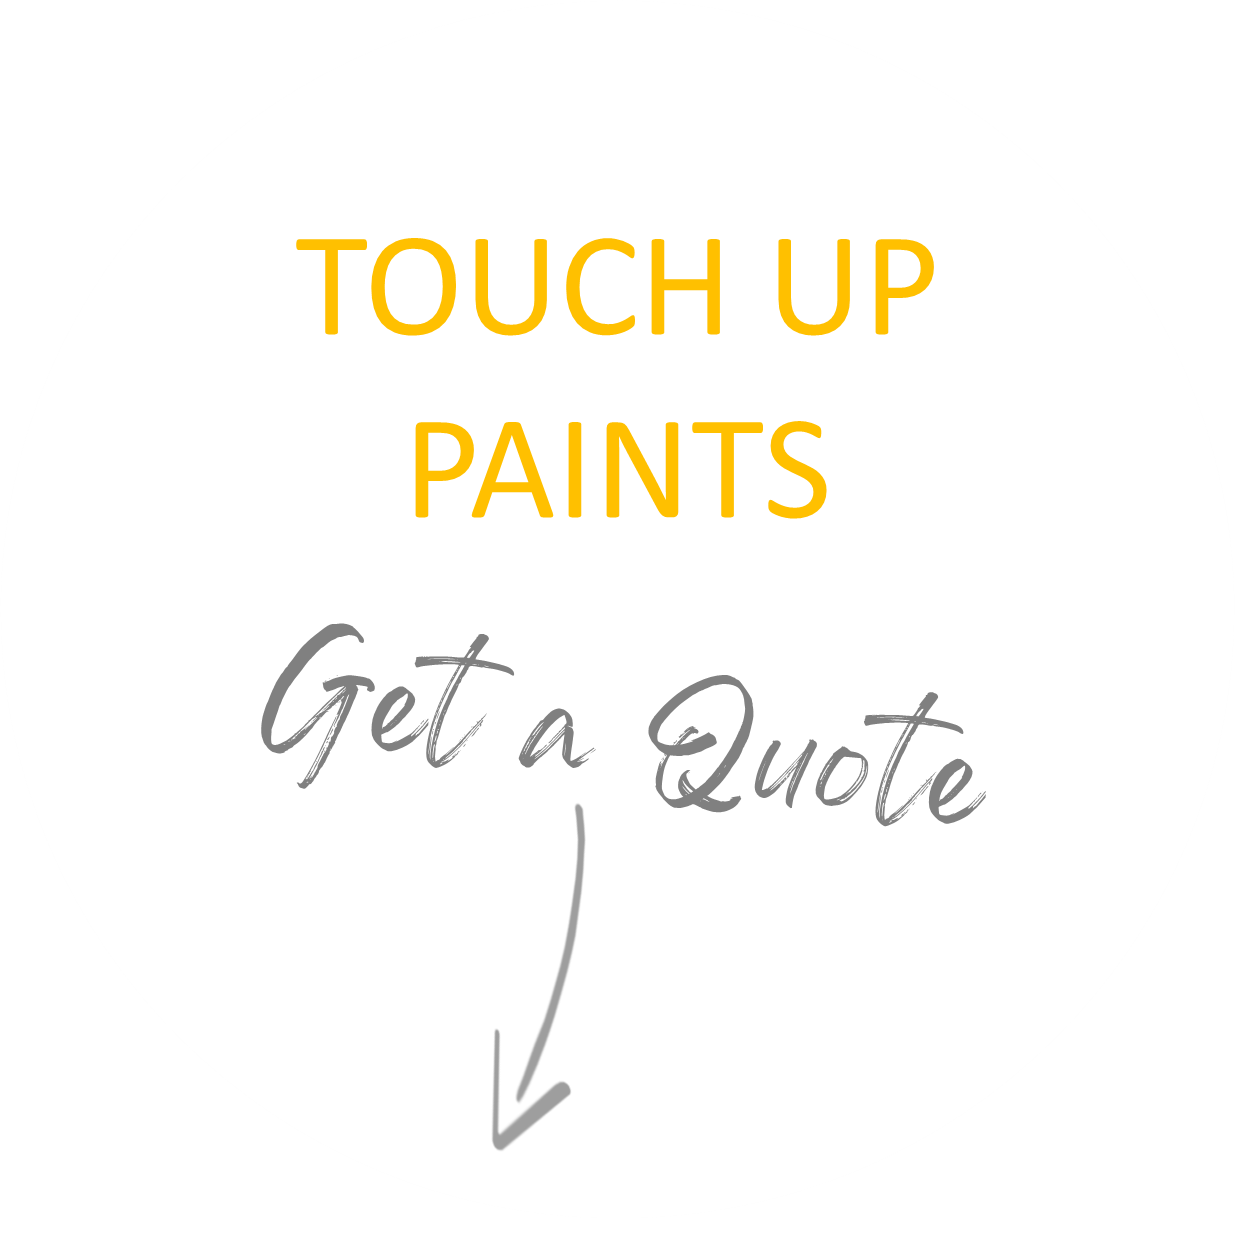 Touch-up paints